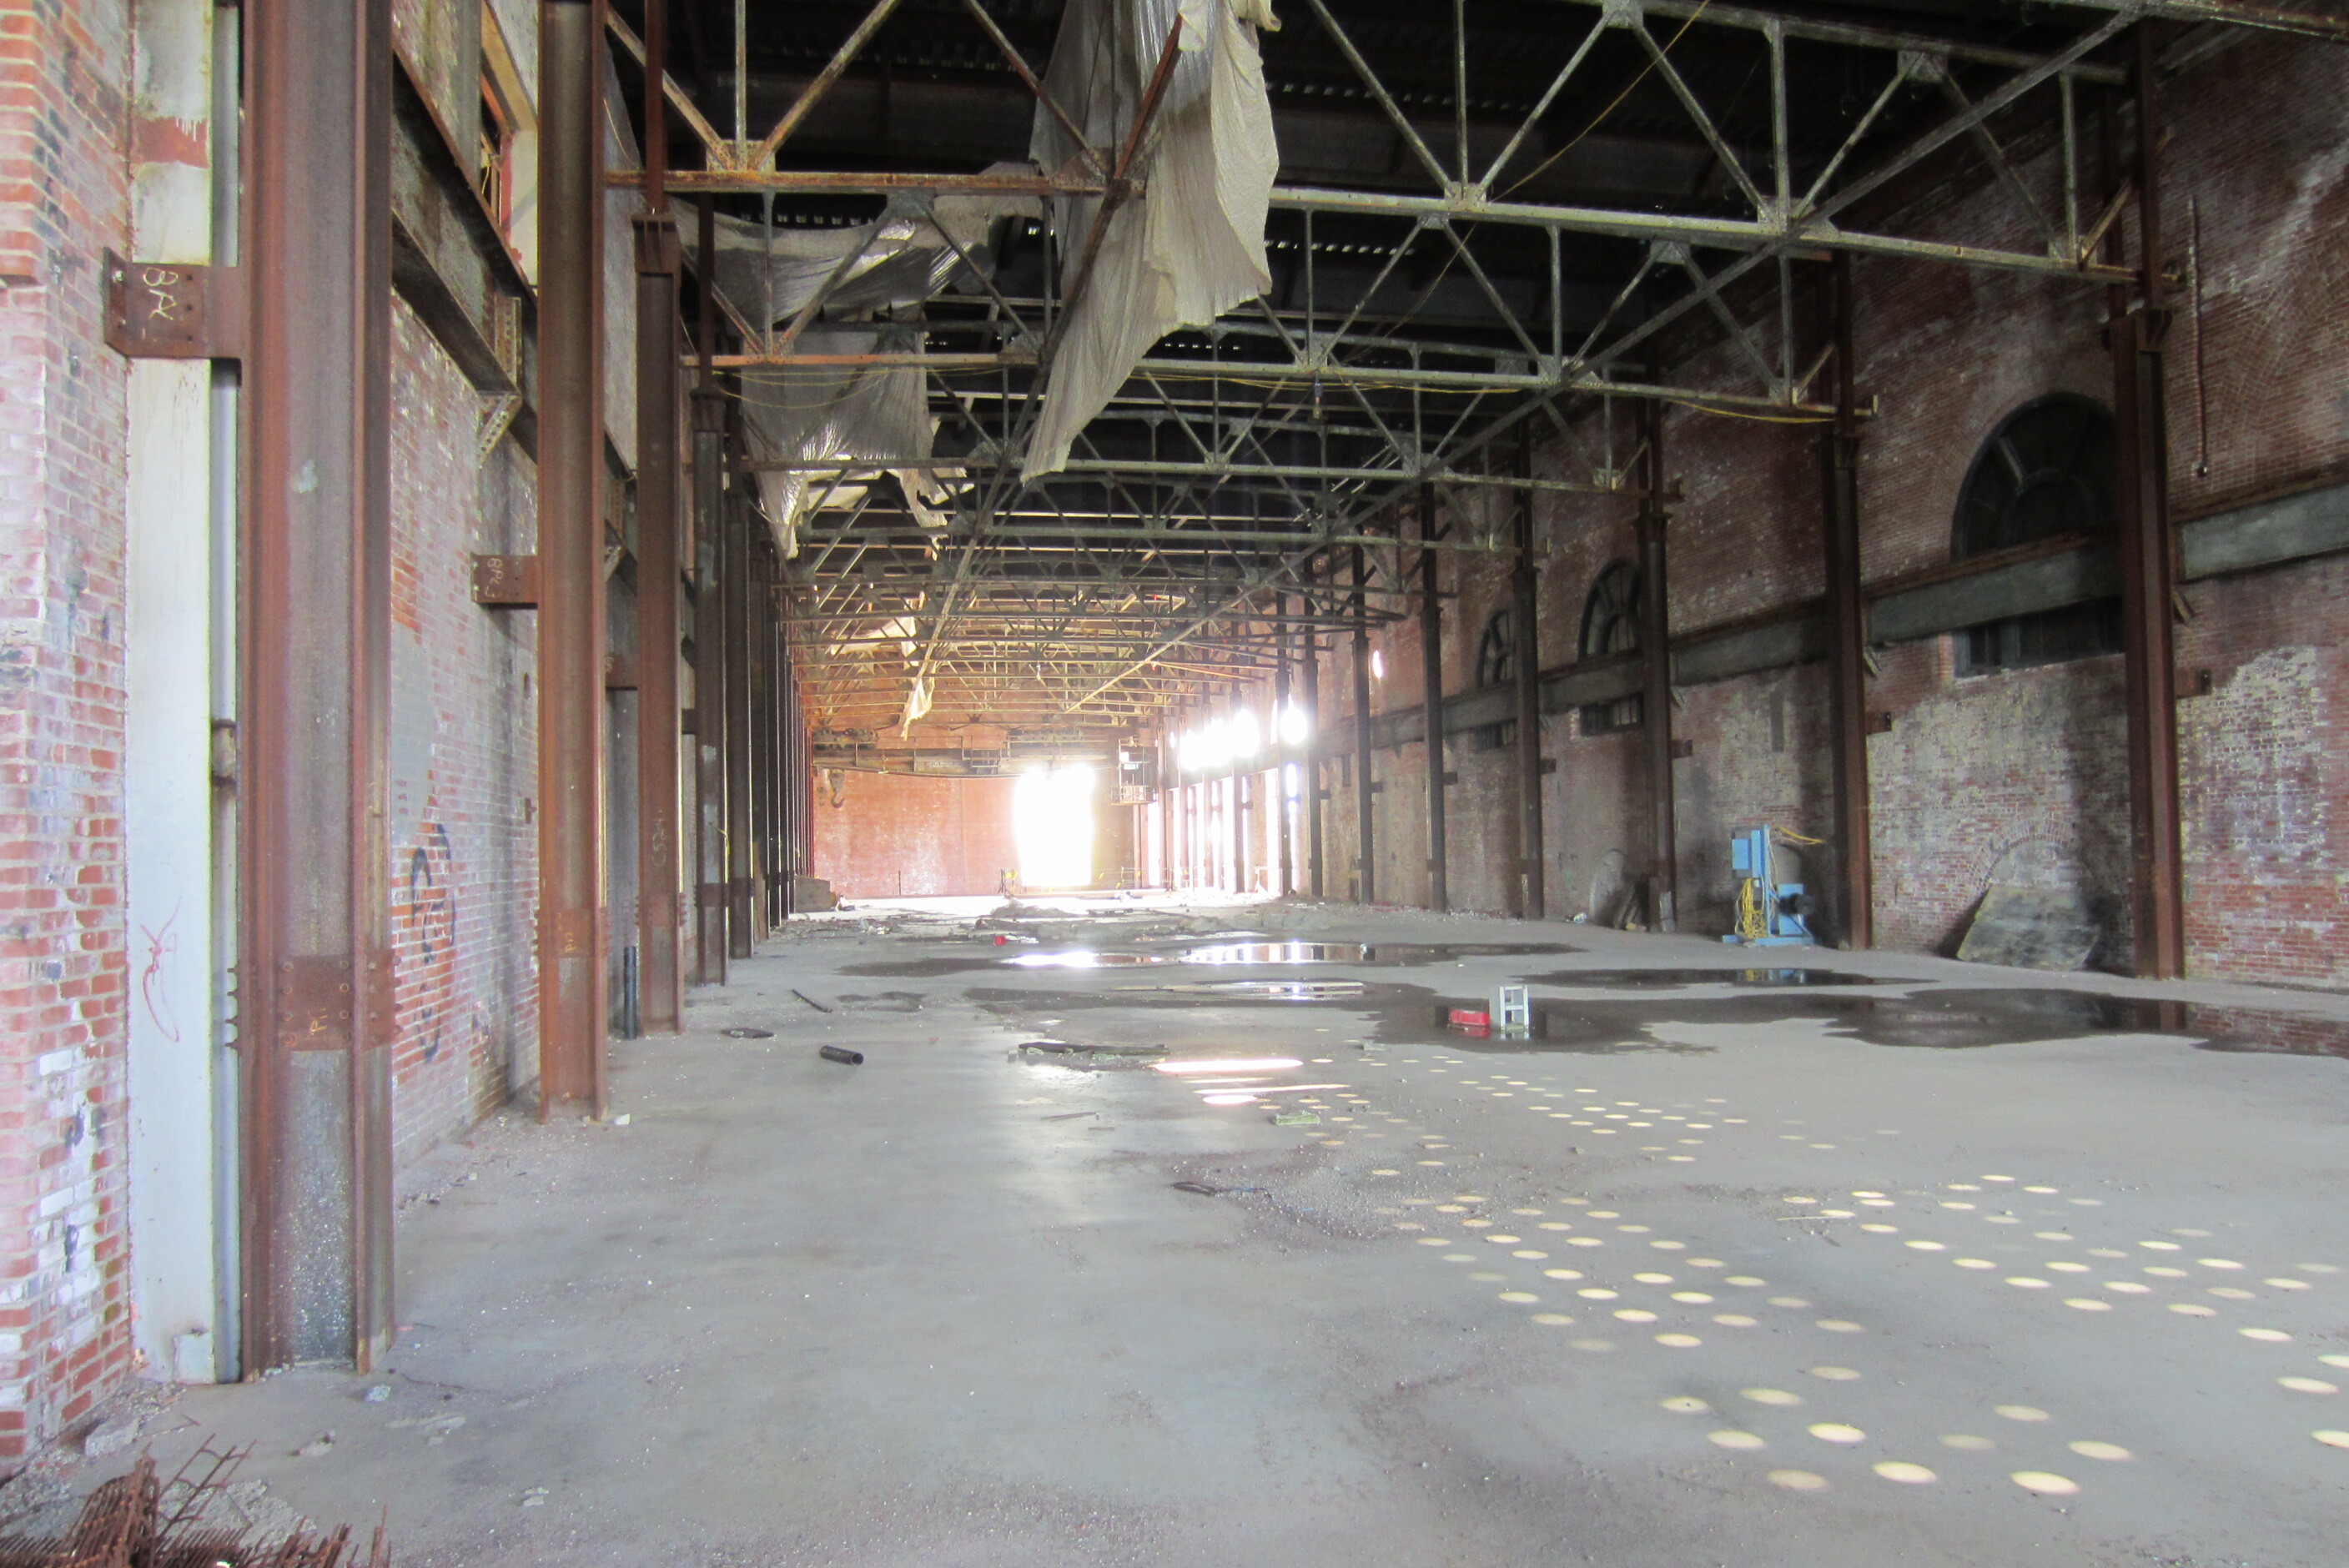 Interior of South Street Landing, pre-renovations (image courtesy of DBVW Architects).